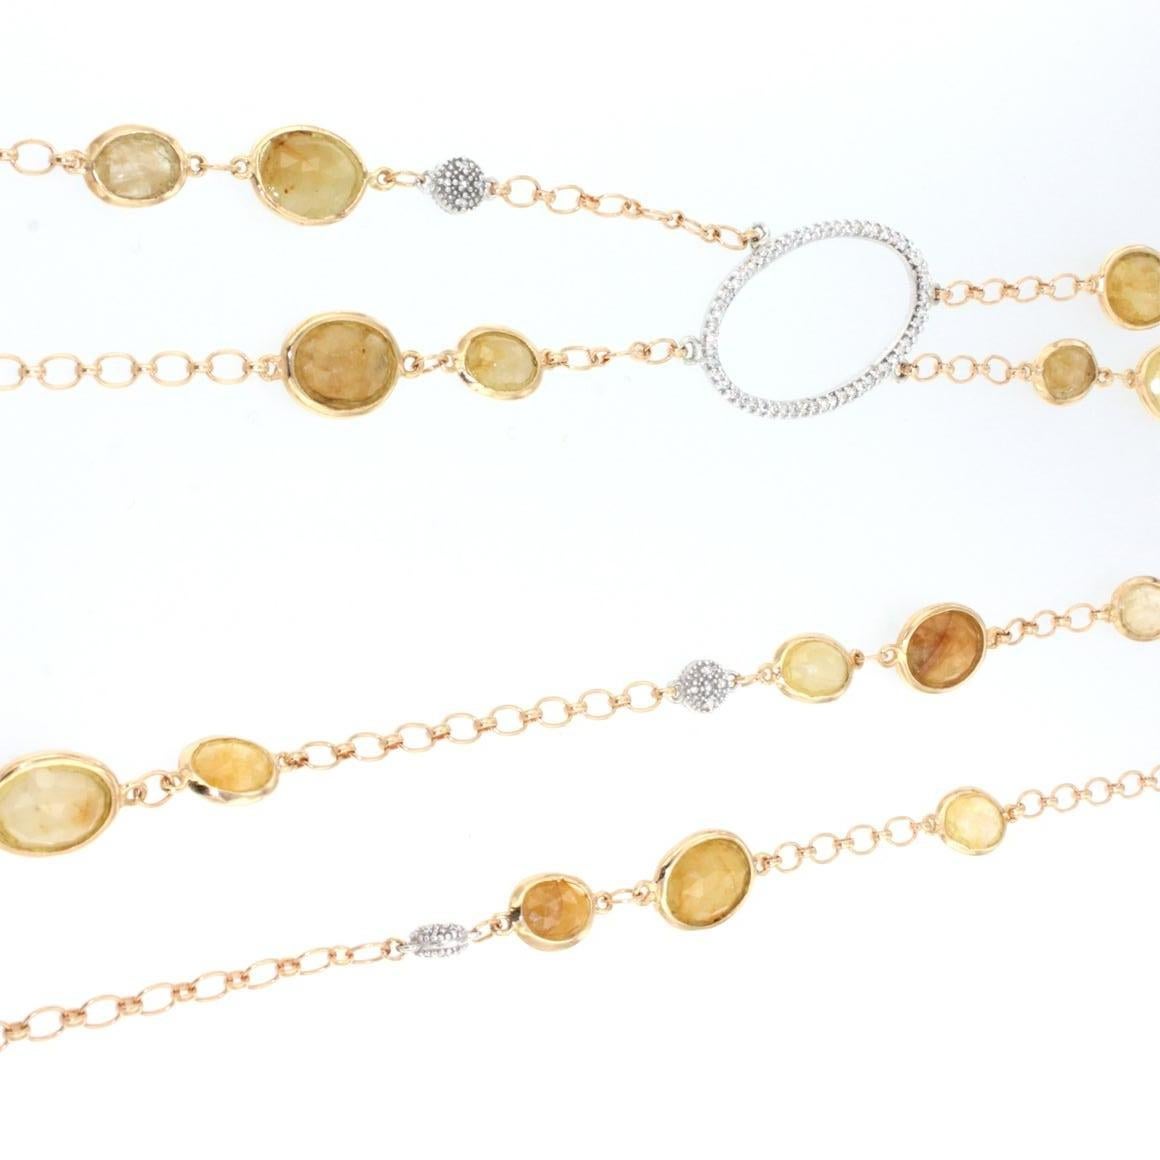 Amazing long necklace  , intense yellow sapphire, very nice and particular design . Made in Italy by Stanoppi Jewellery since 1948.

Long necklace  in 18k rose gold with yellow Sapphire (oval cut, size: 8x12 mm  ) and white Diamonds cts 0.56 +0.40